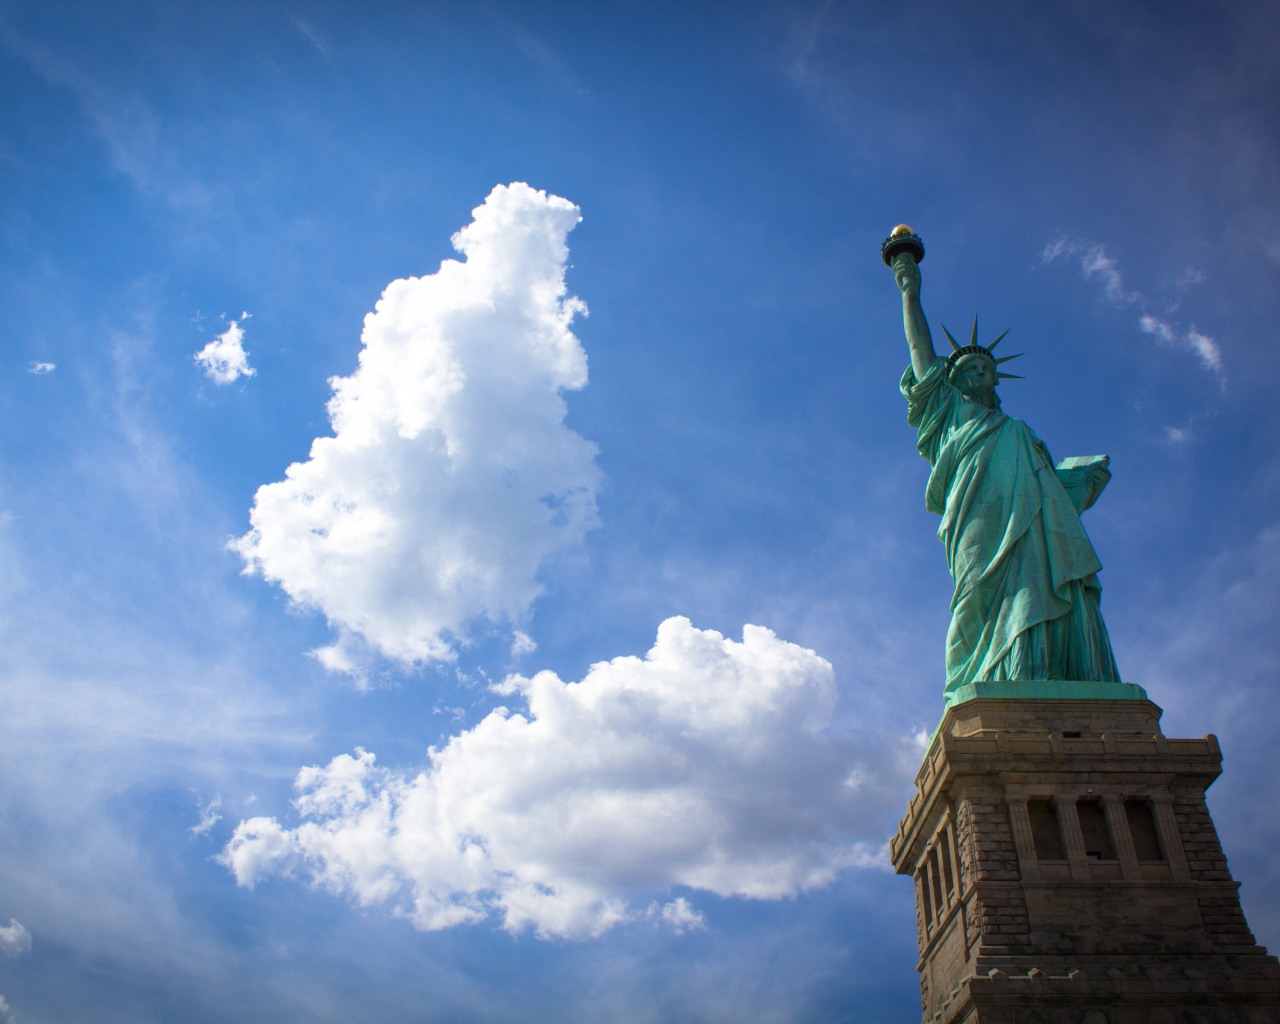 Statue of Liberty on the background of clouds, New York, USA